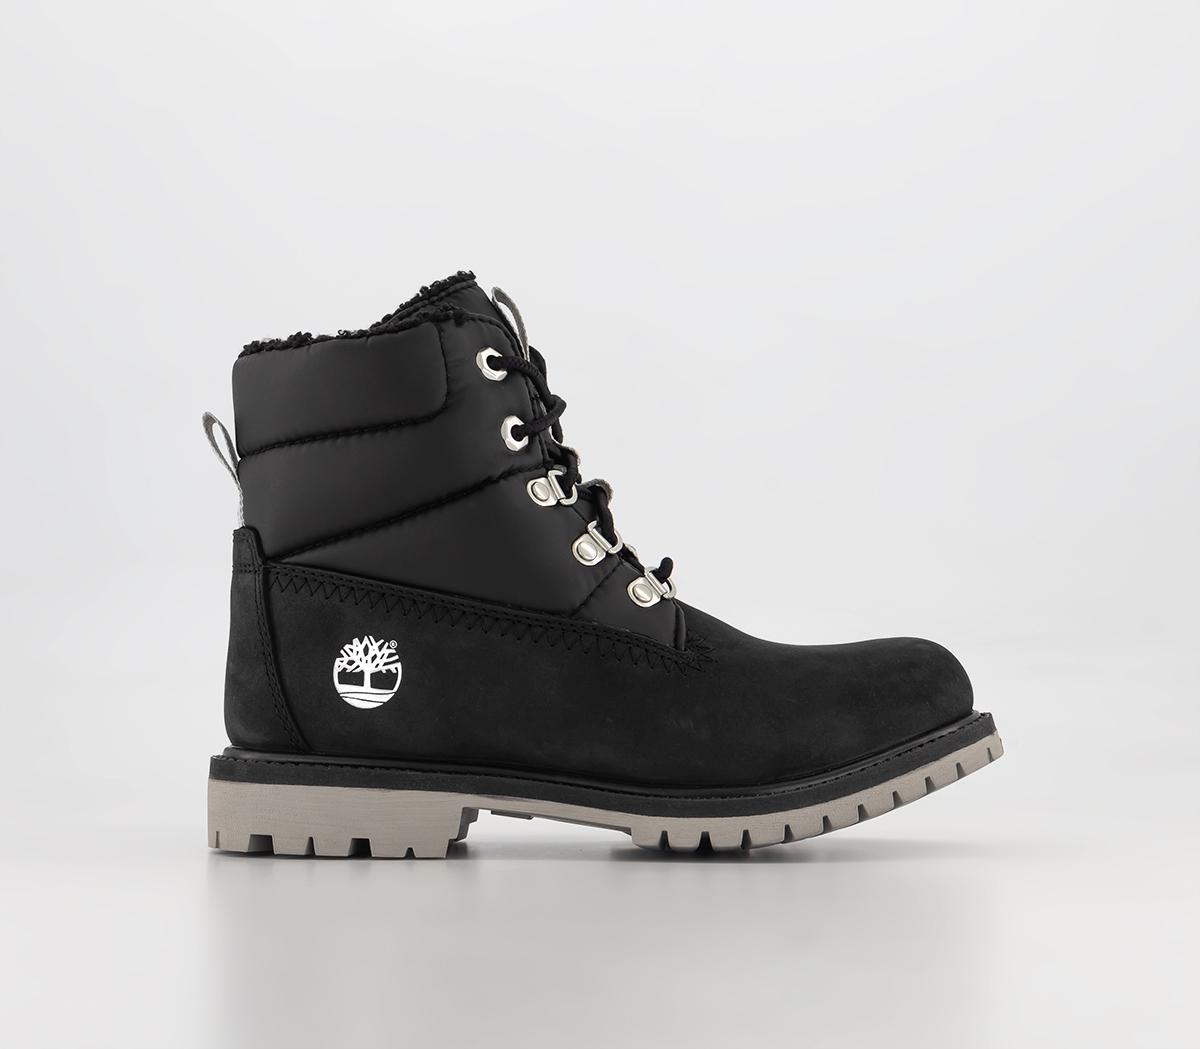 Timberland 6 Premium Puffer Boots Black Nubuck Silver - Women's Ankle Boots